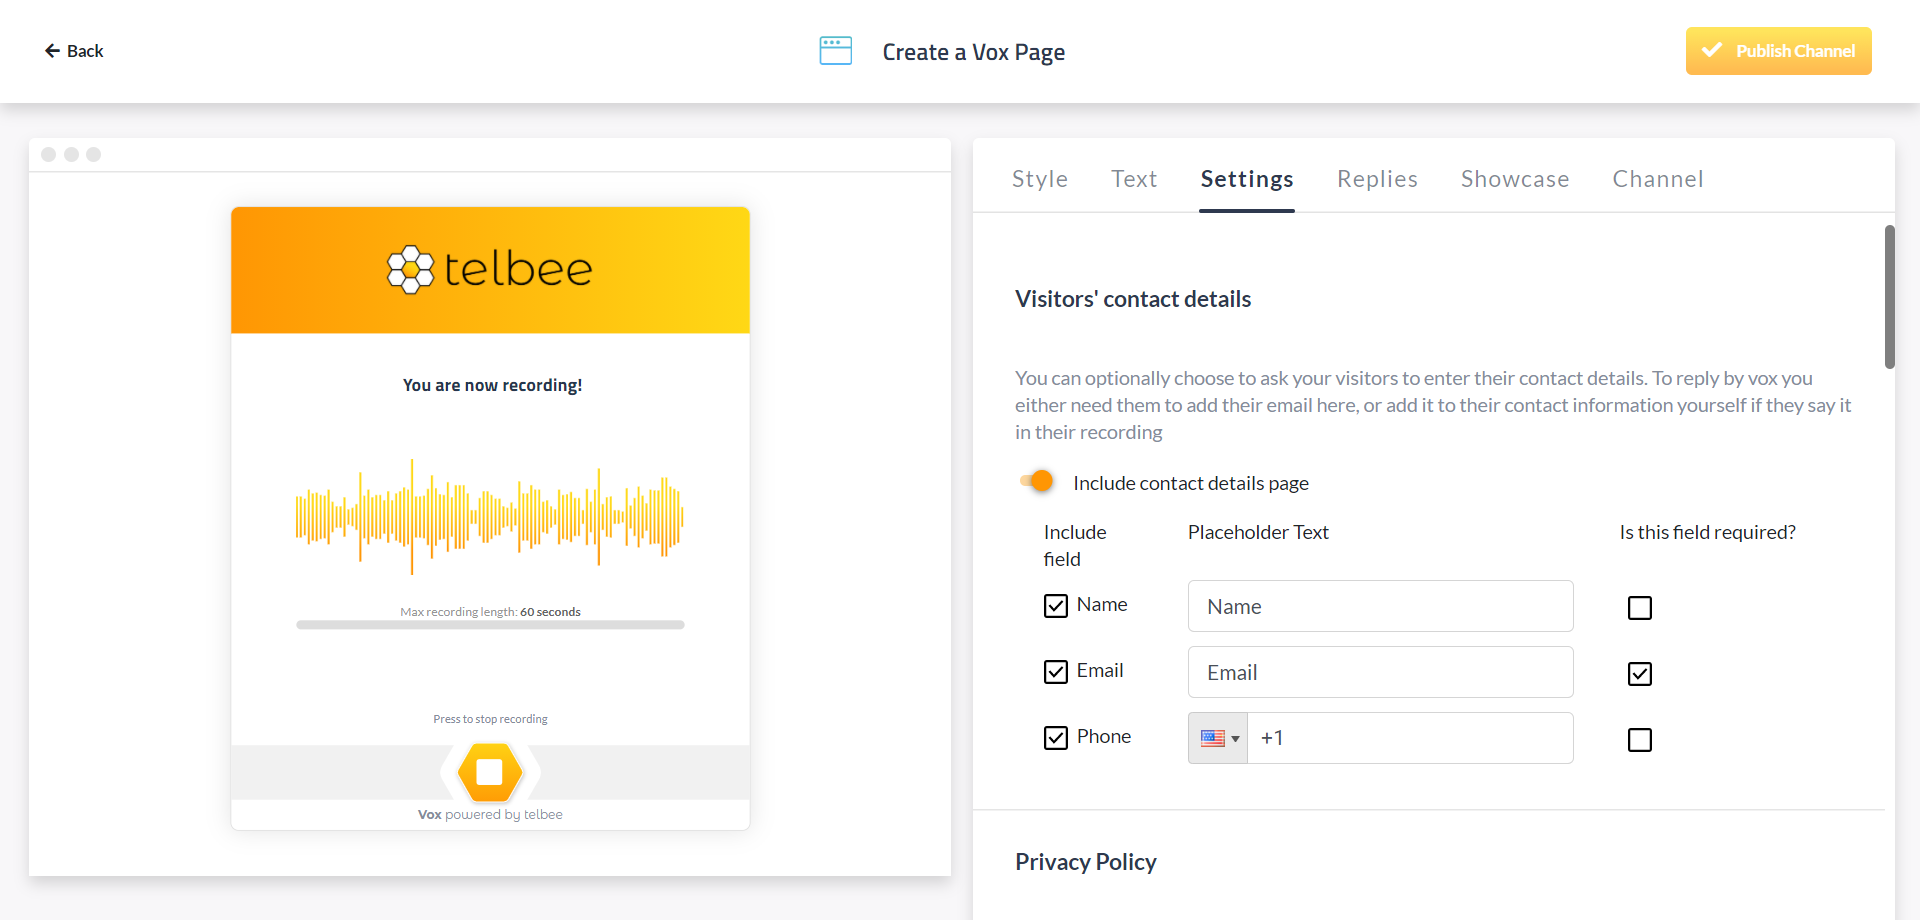 Find pricing, reviews and other details about telbee